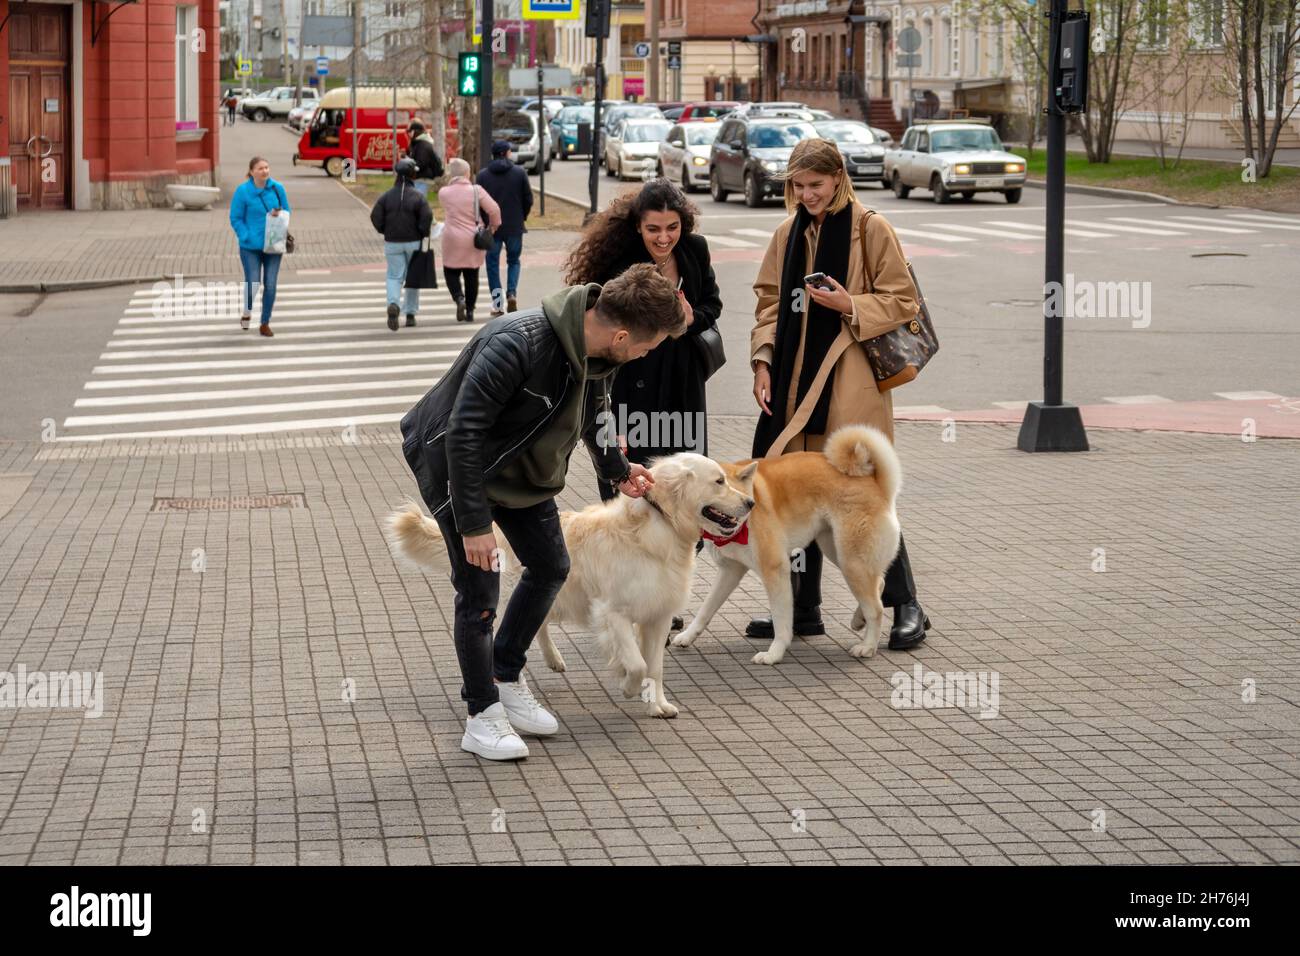 Two dogs and their young owners met at an intersection near a pedestrian crossing with people in the spring. Stock Photo